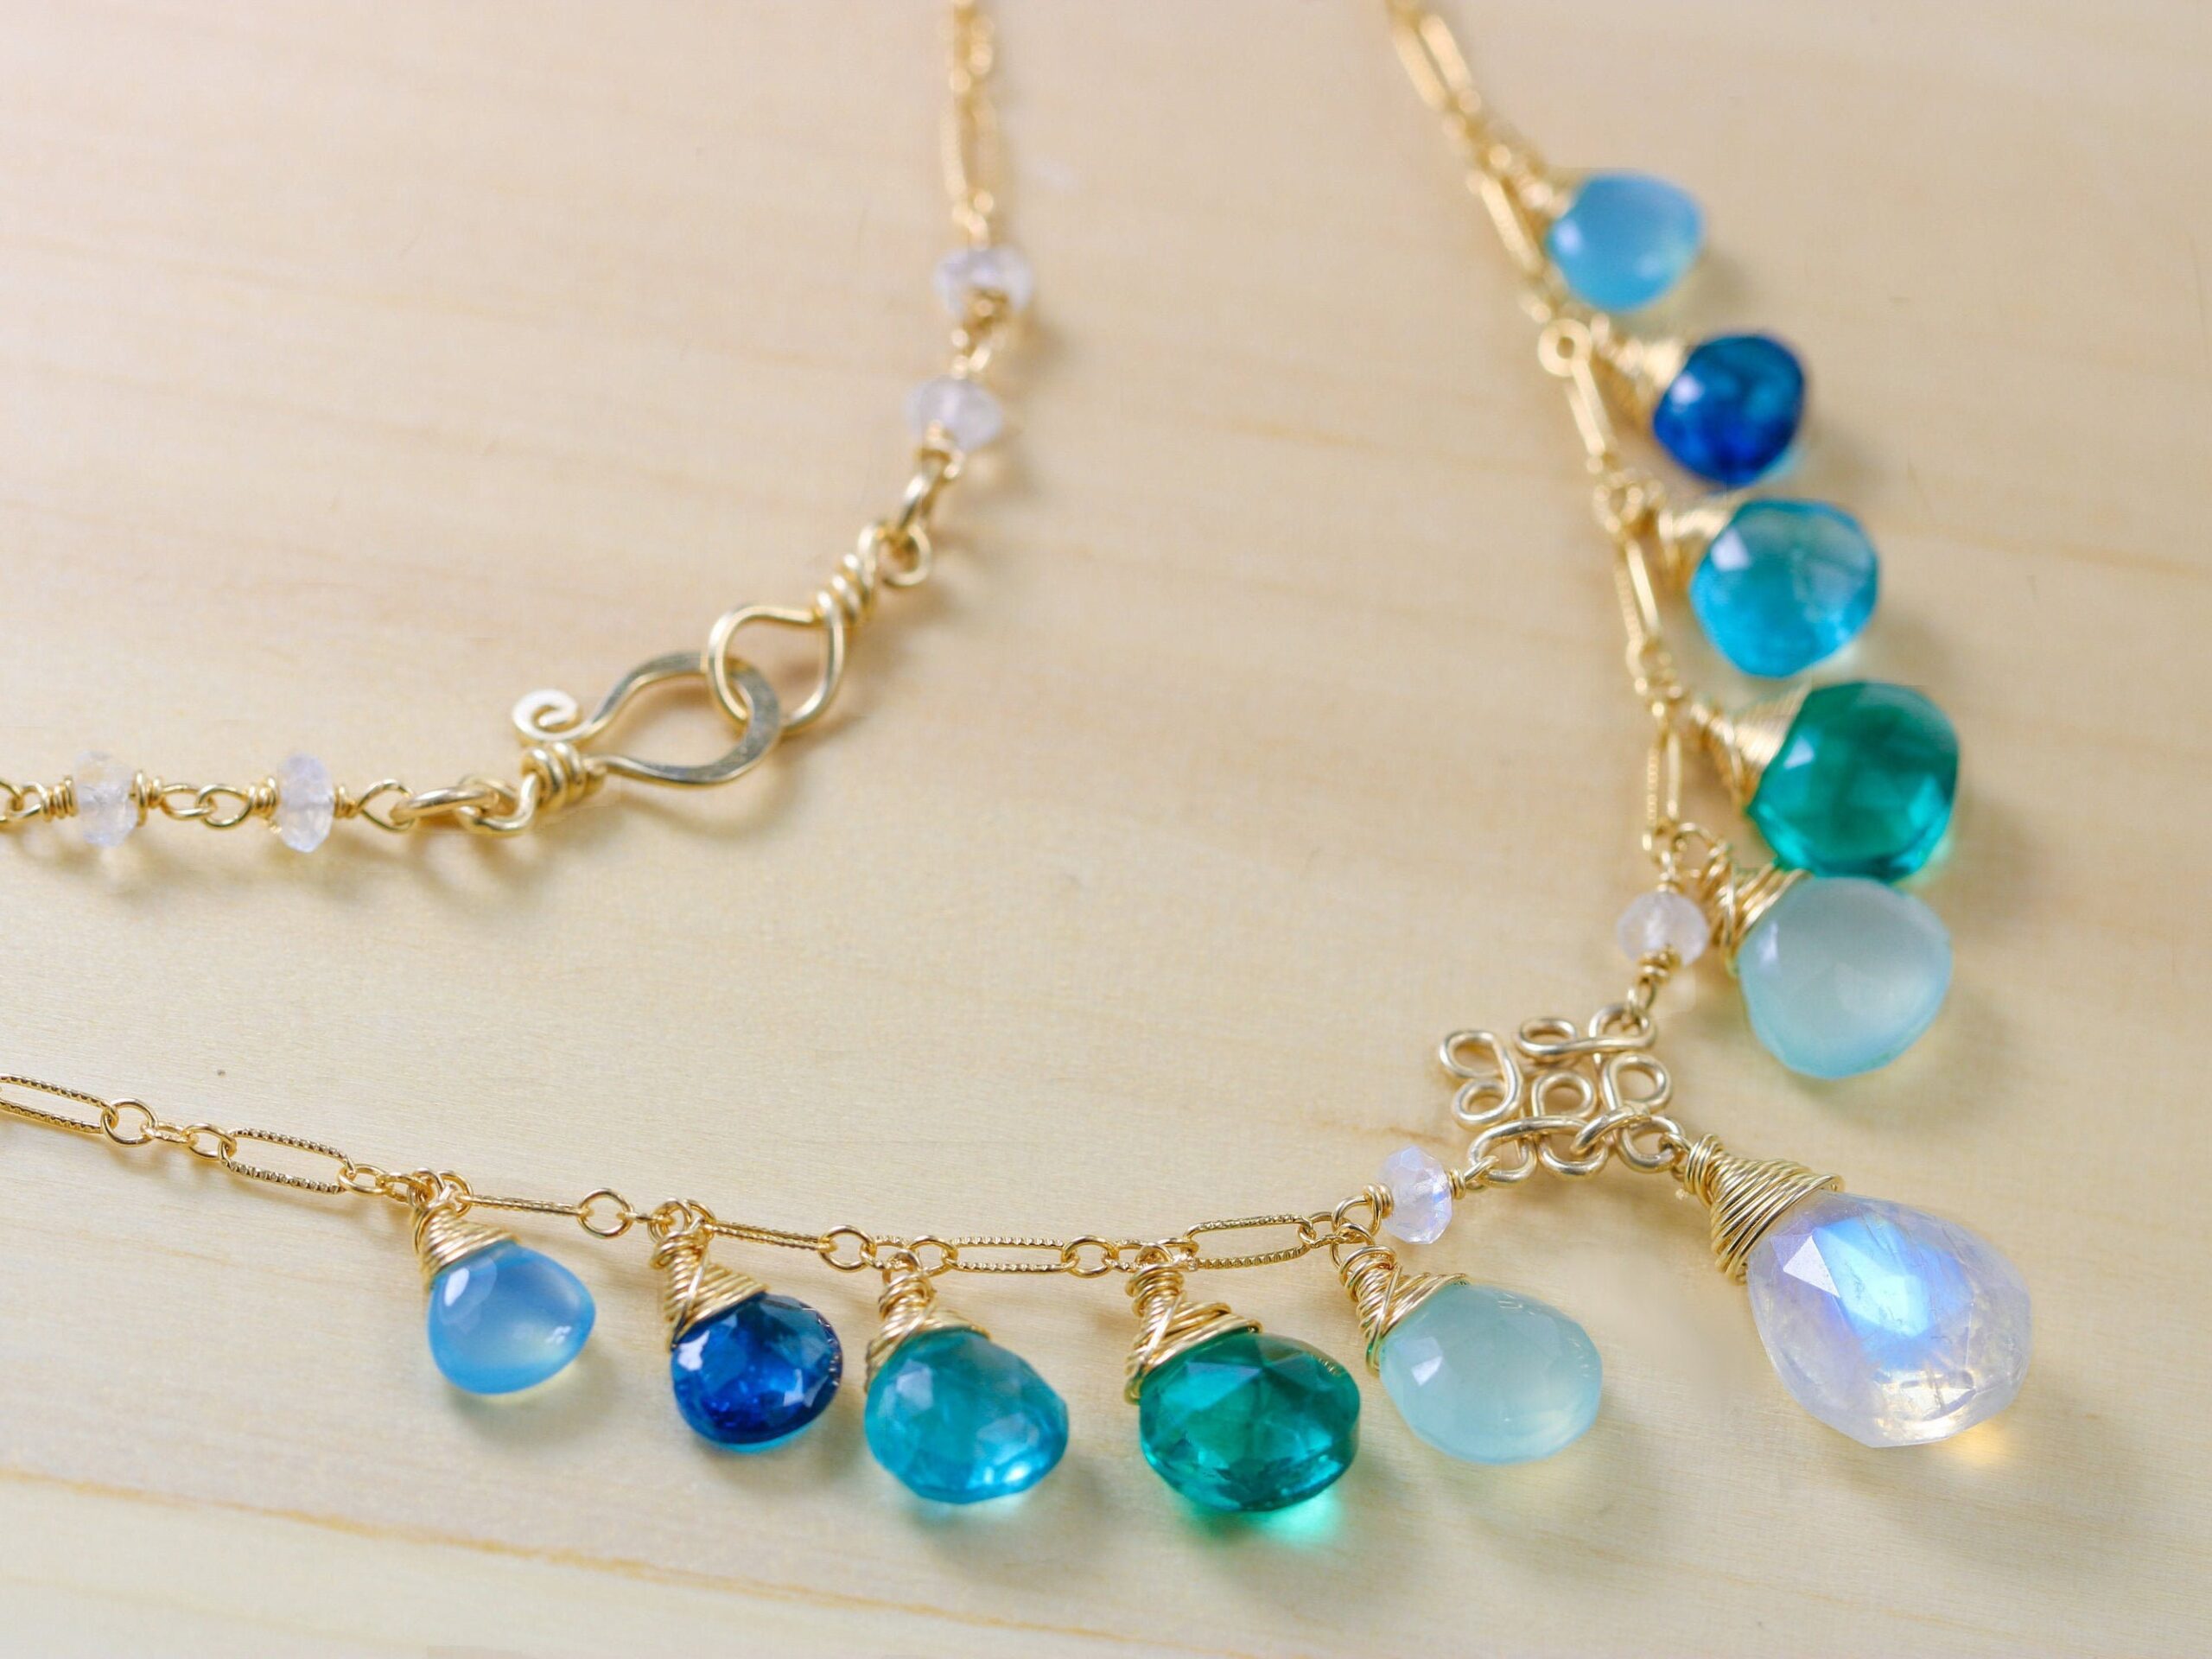 Solid Gold 14K Aqua Blue Gemstone Necklace with Rainbow Moonstone, Apatite and Chalcedony